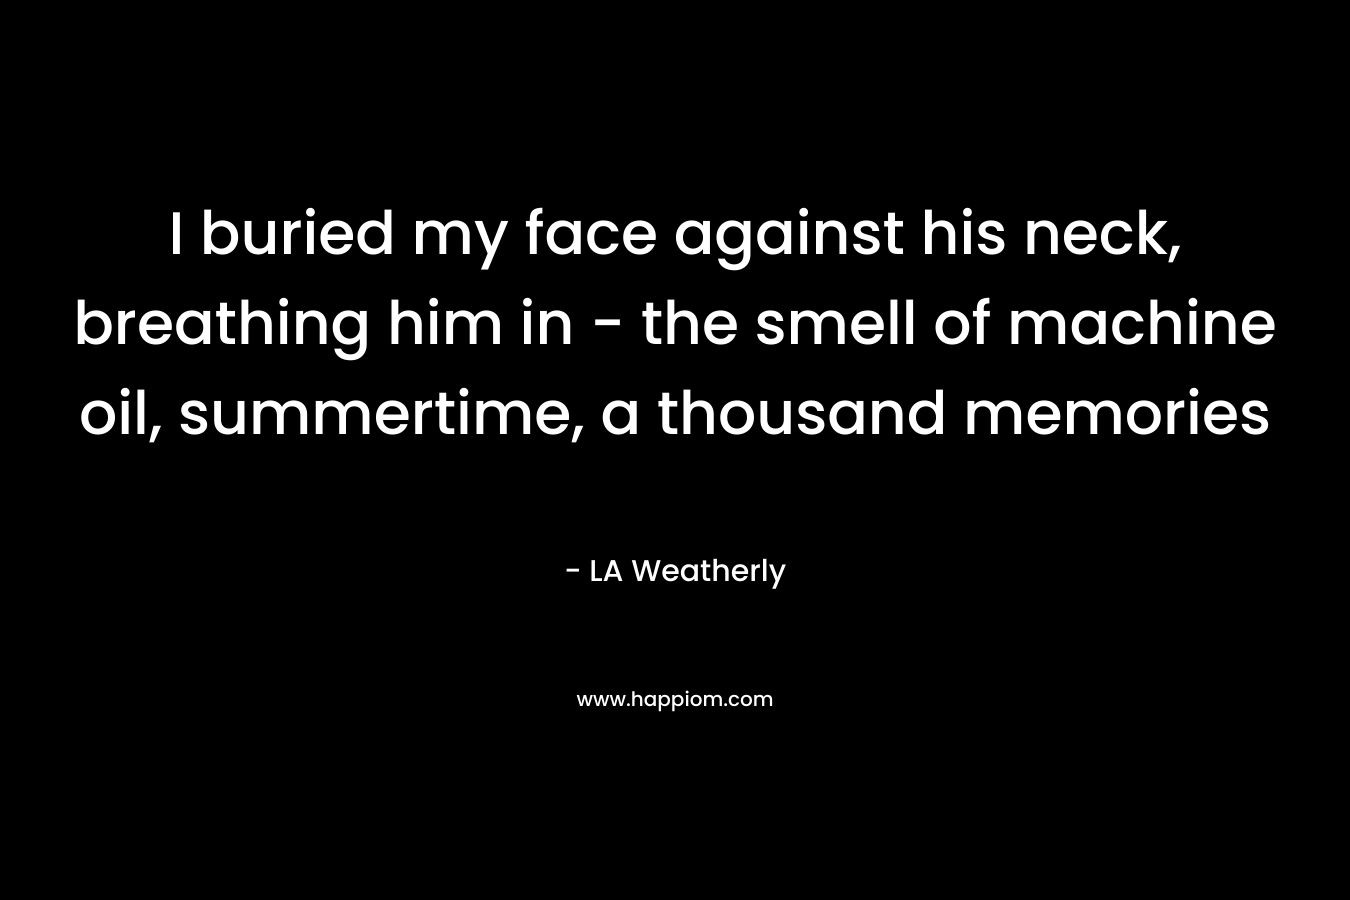 I buried my face against his neck, breathing him in – the smell of machine oil, summertime, a thousand memories – LA Weatherly